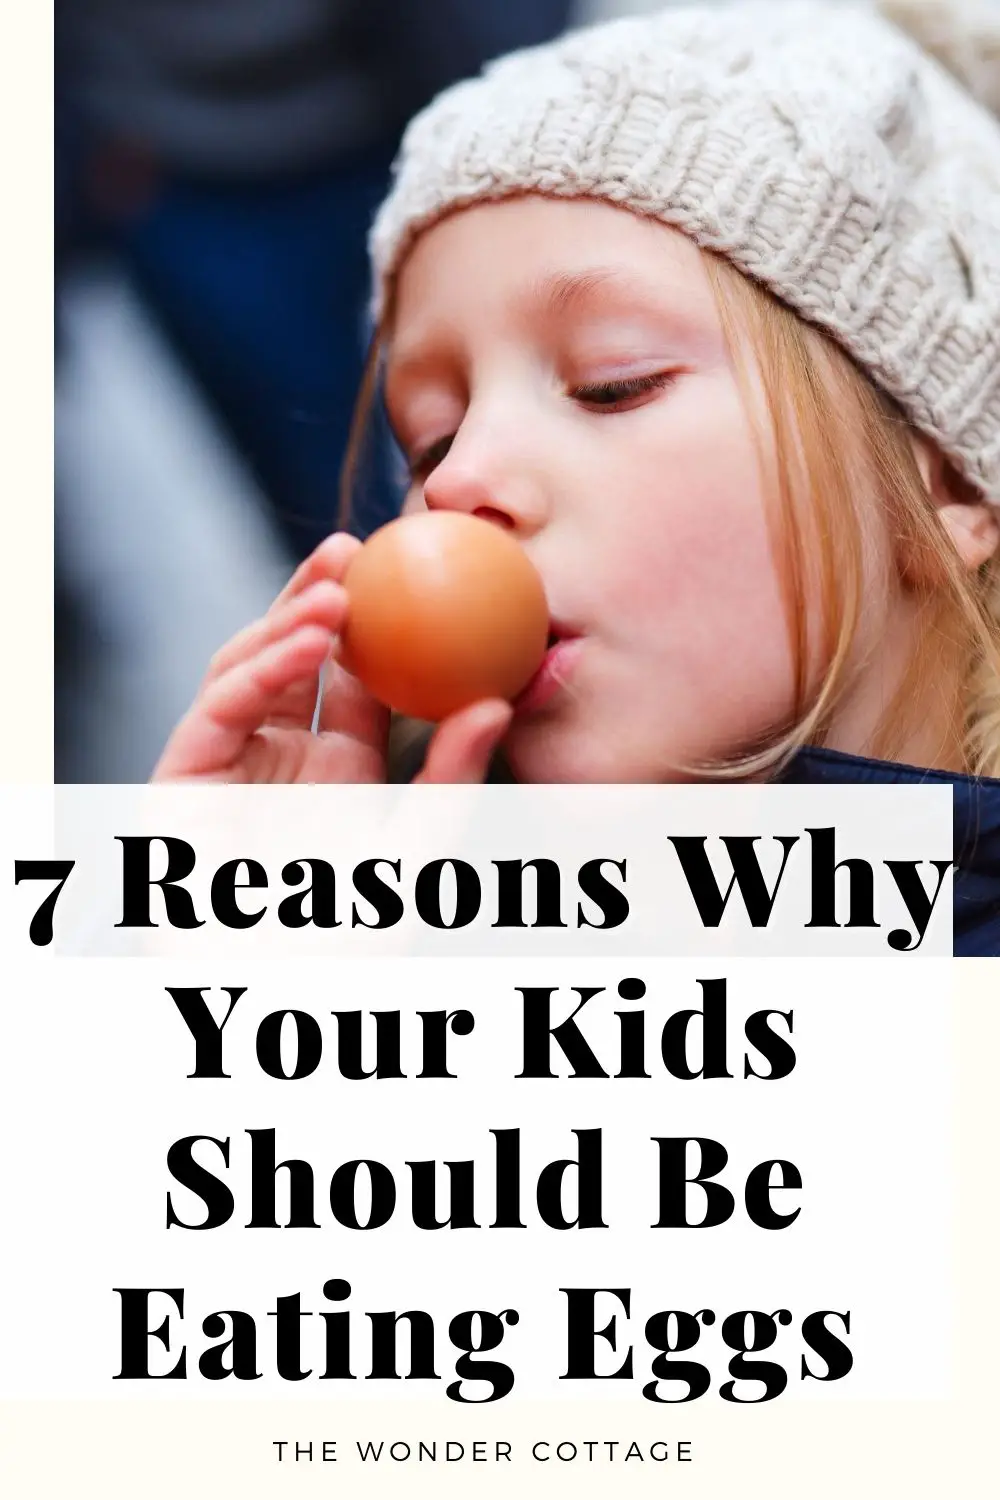 7 reasons why your kids should be eating eggs